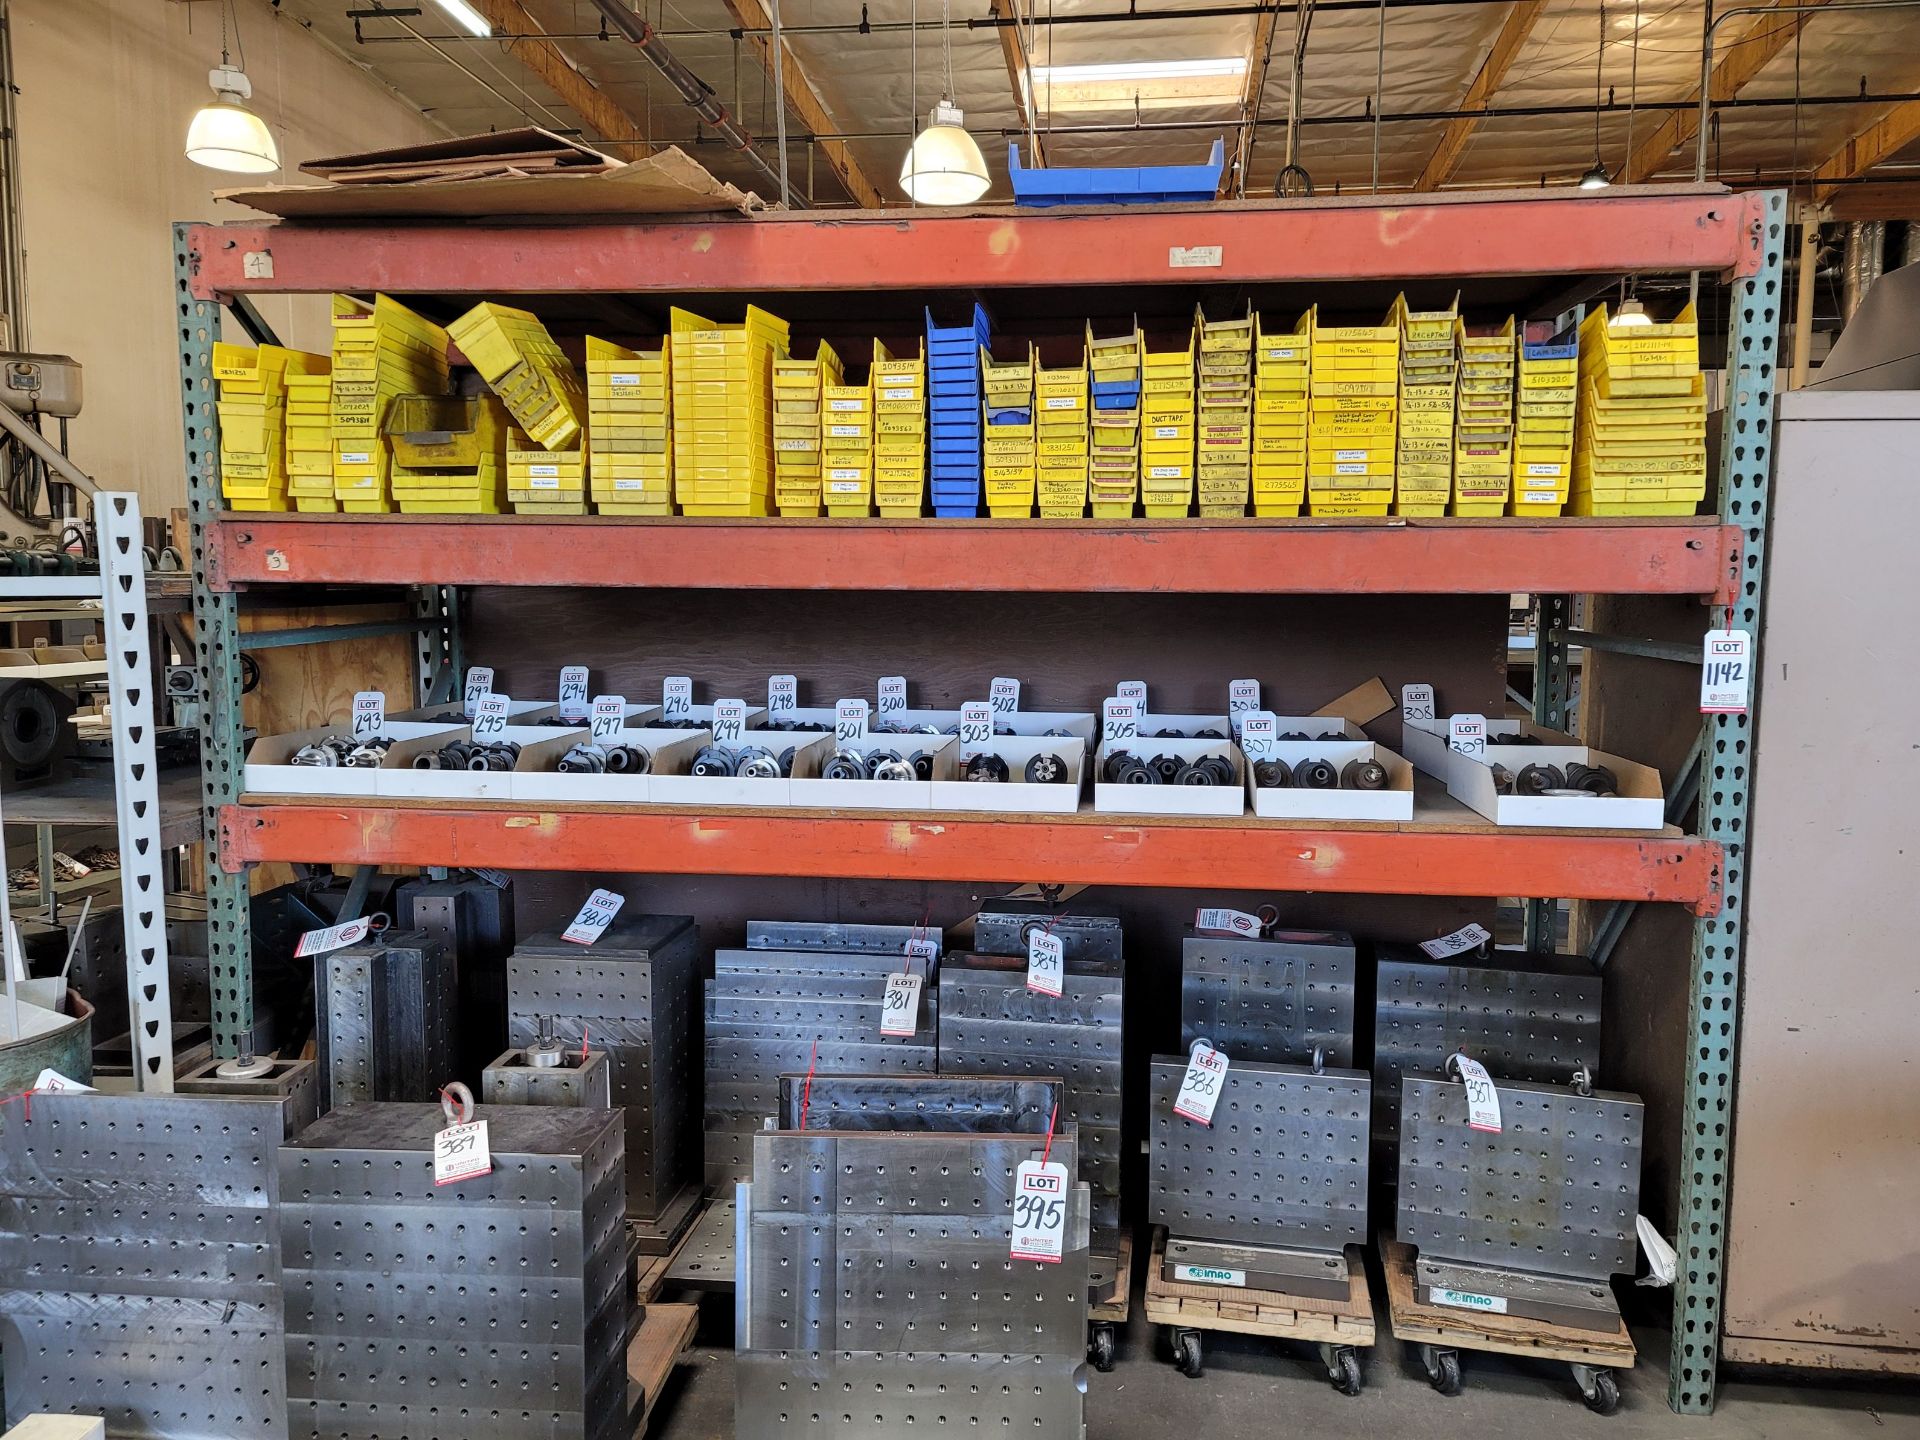 LOT - (1) SECTION PALLET RACK, 10' BEAMS, 94" UPRIGHTS, CONTENTS NOT INCLUDED, (DELAYED PICKUP UNTIL